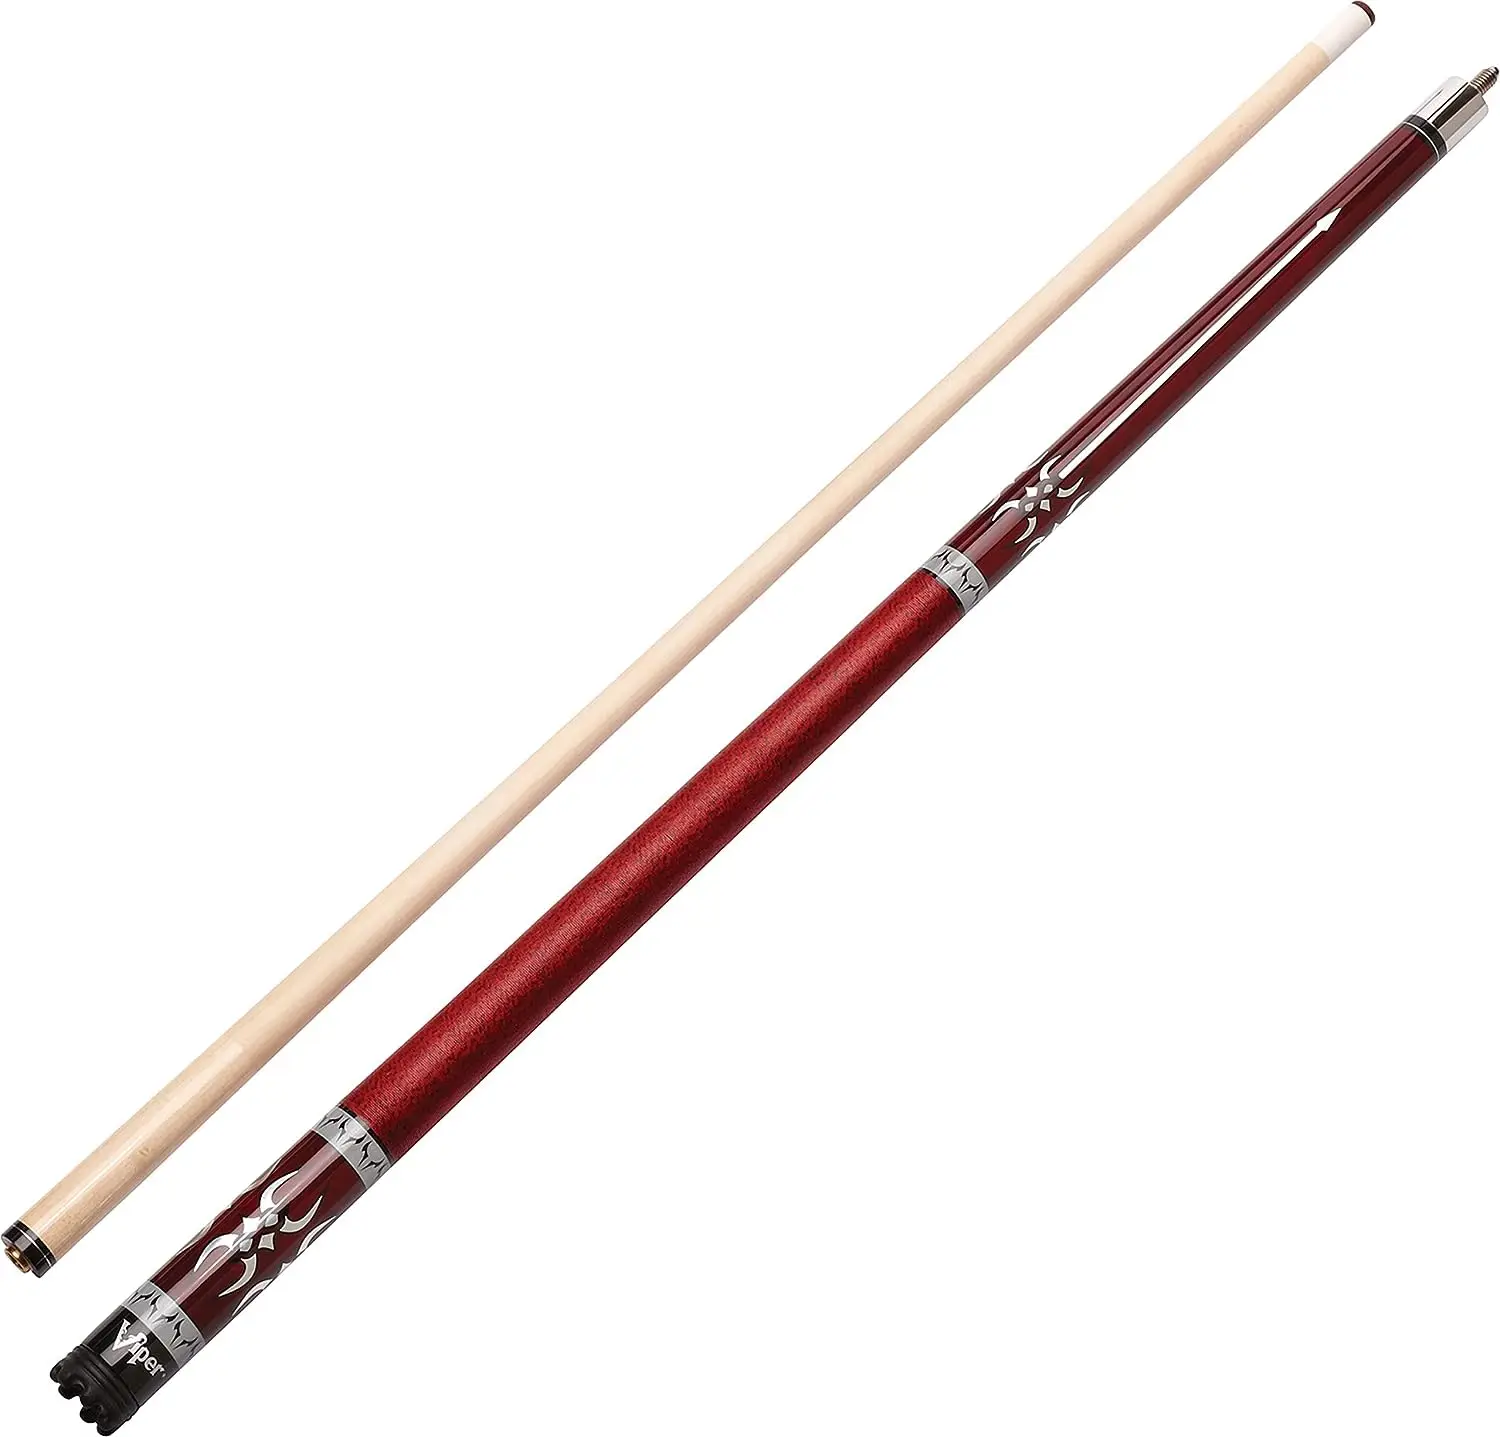 

Sinister 58" 2-Piece Billiard/Pool Cue, Burgundy with Pearlized Inlay